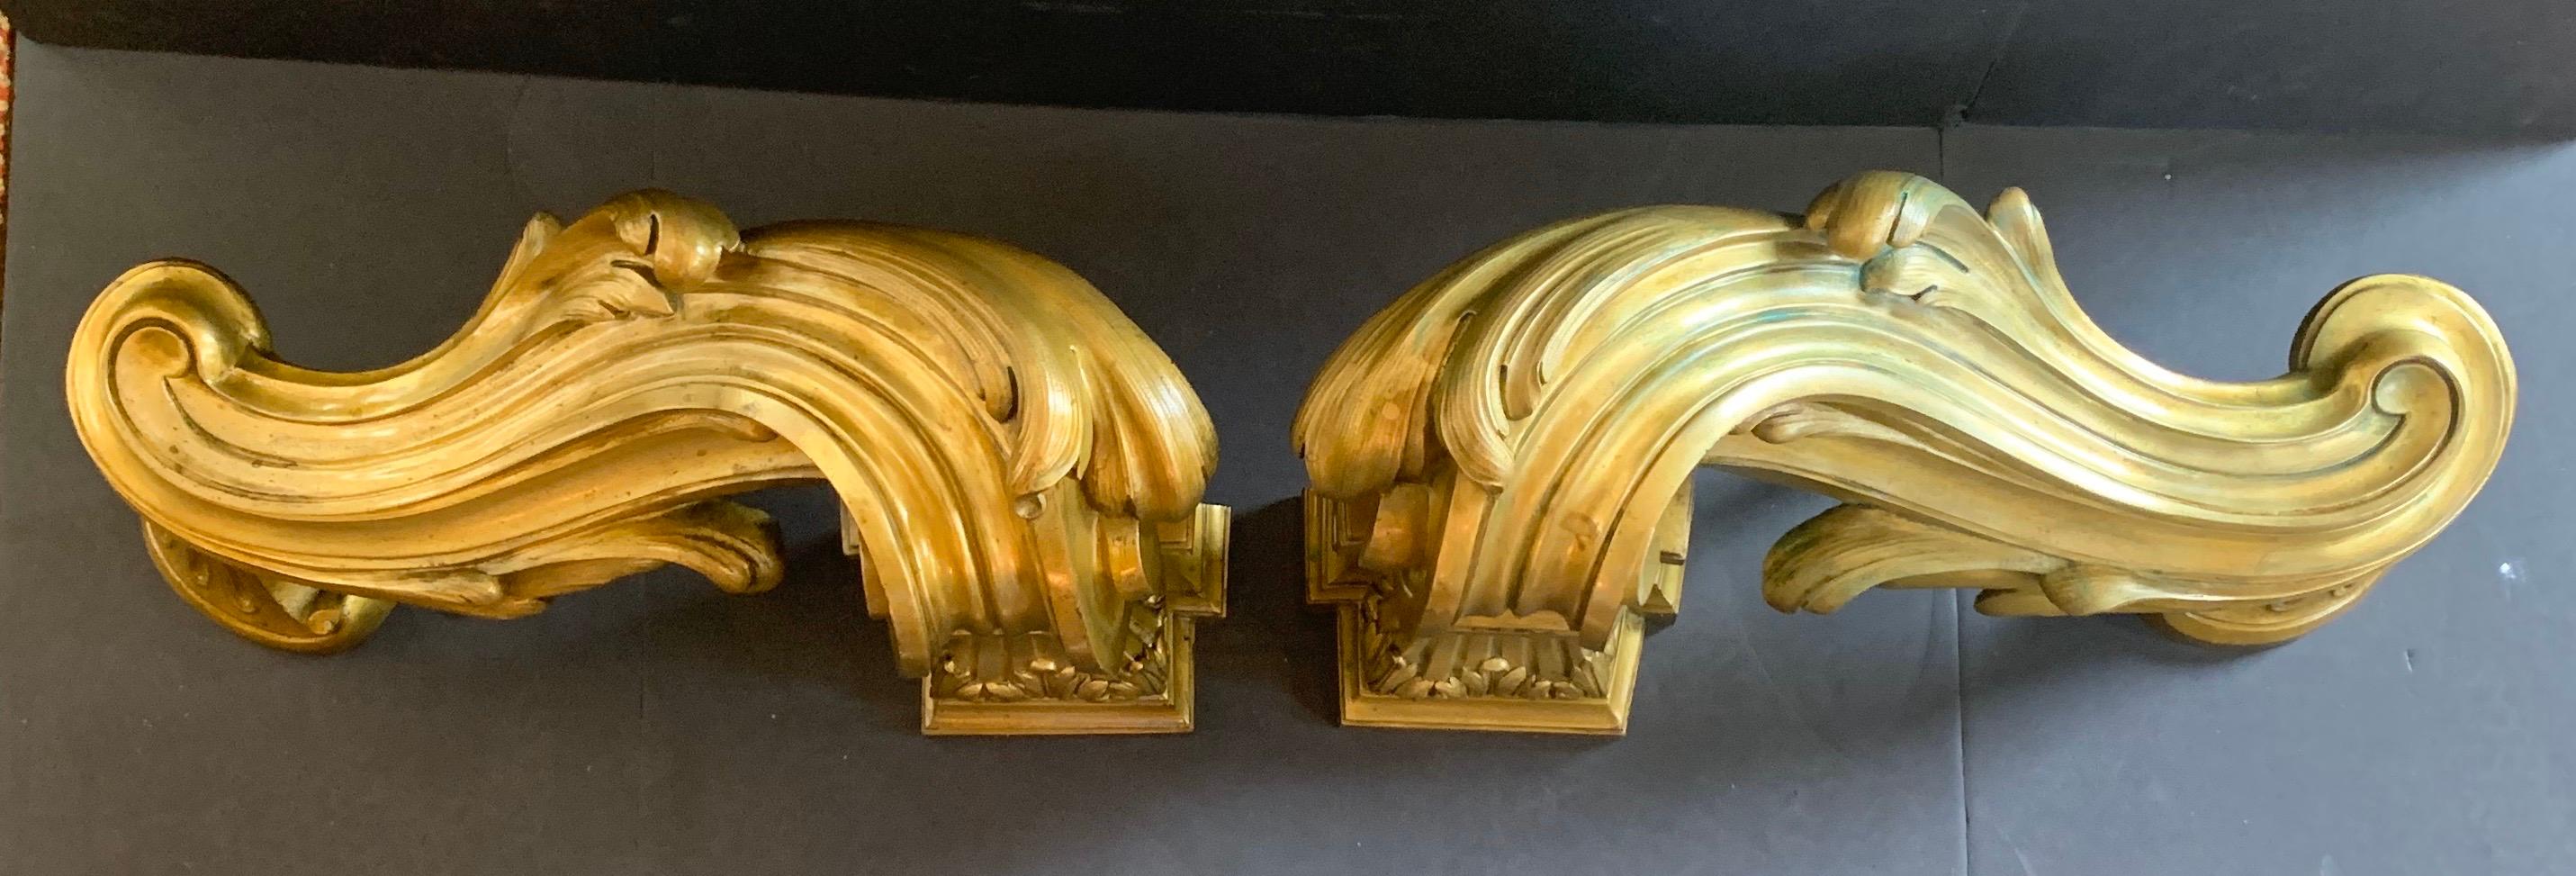 Wonderful Pair of French Louis XV Neoclassical Regency Bronze Fireplace Andirons 3